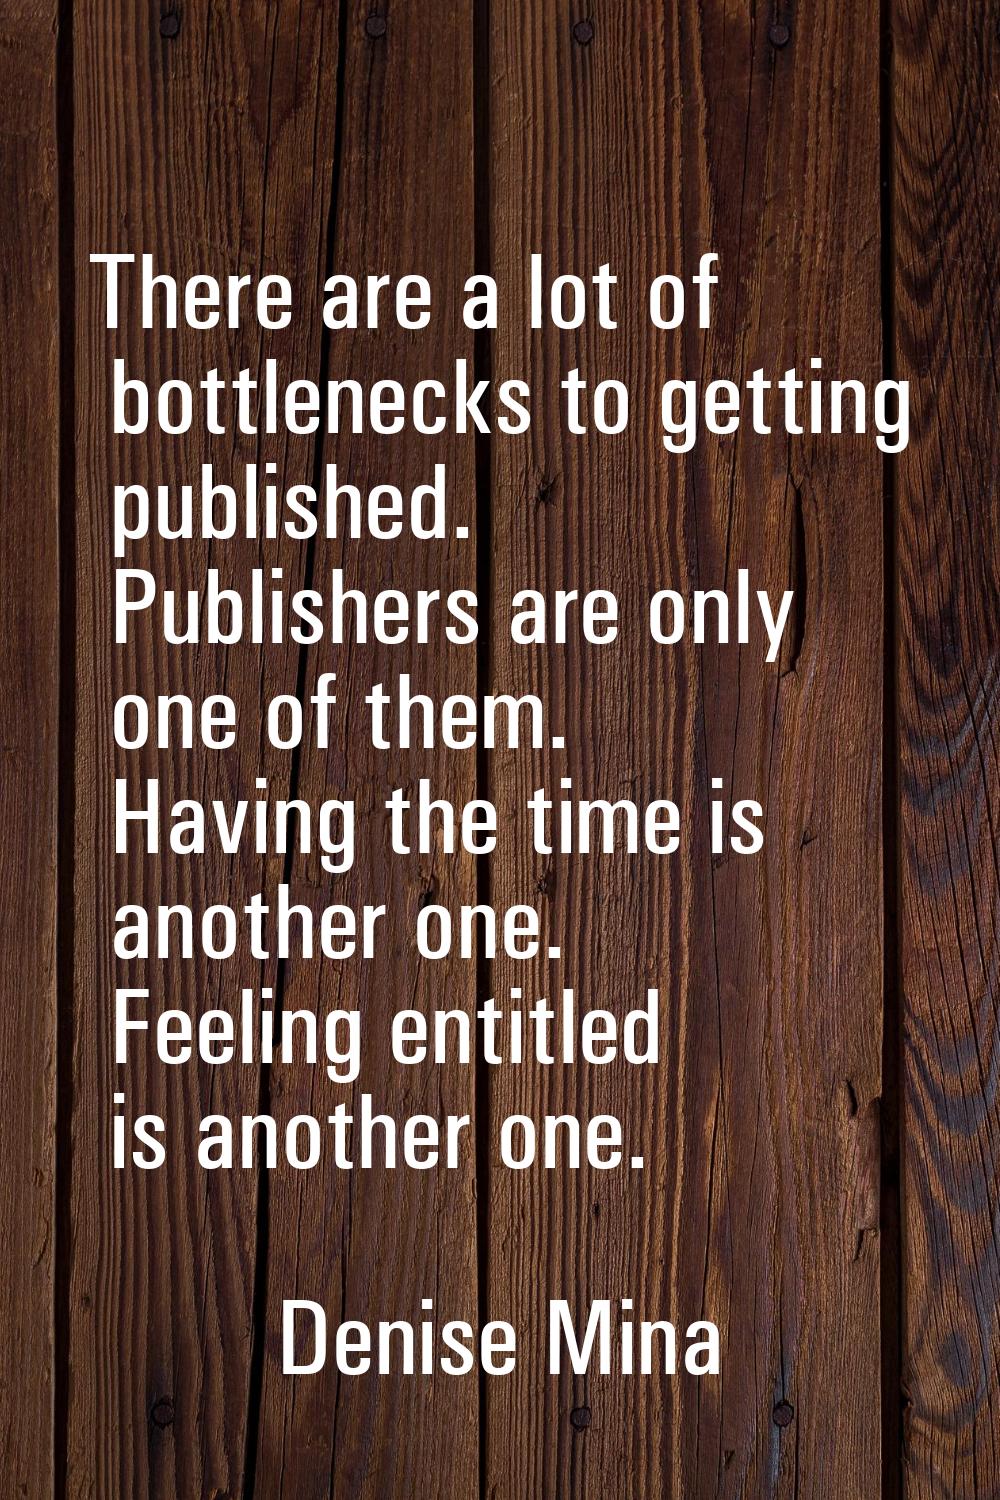 There are a lot of bottlenecks to getting published. Publishers are only one of them. Having the ti